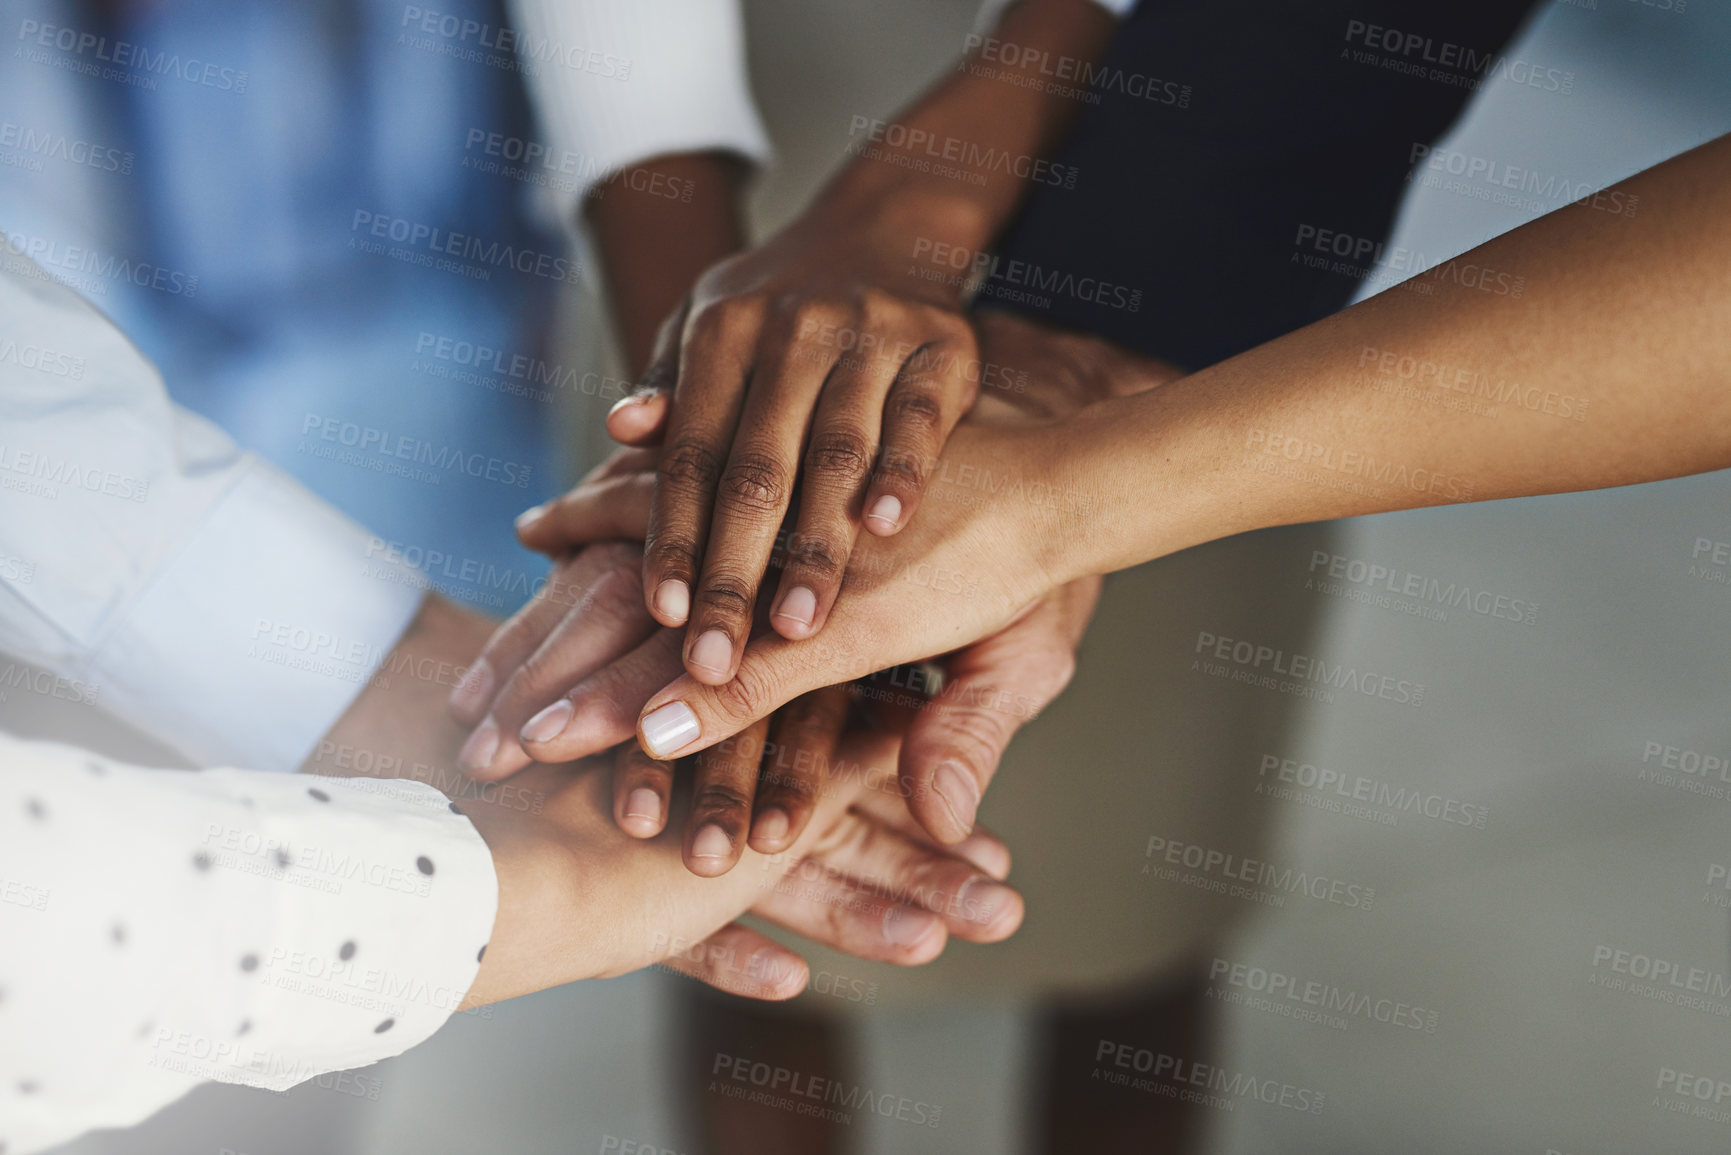 Buy stock photo High angle shot of a group of unrecognizable coworkers' hands in a huddle